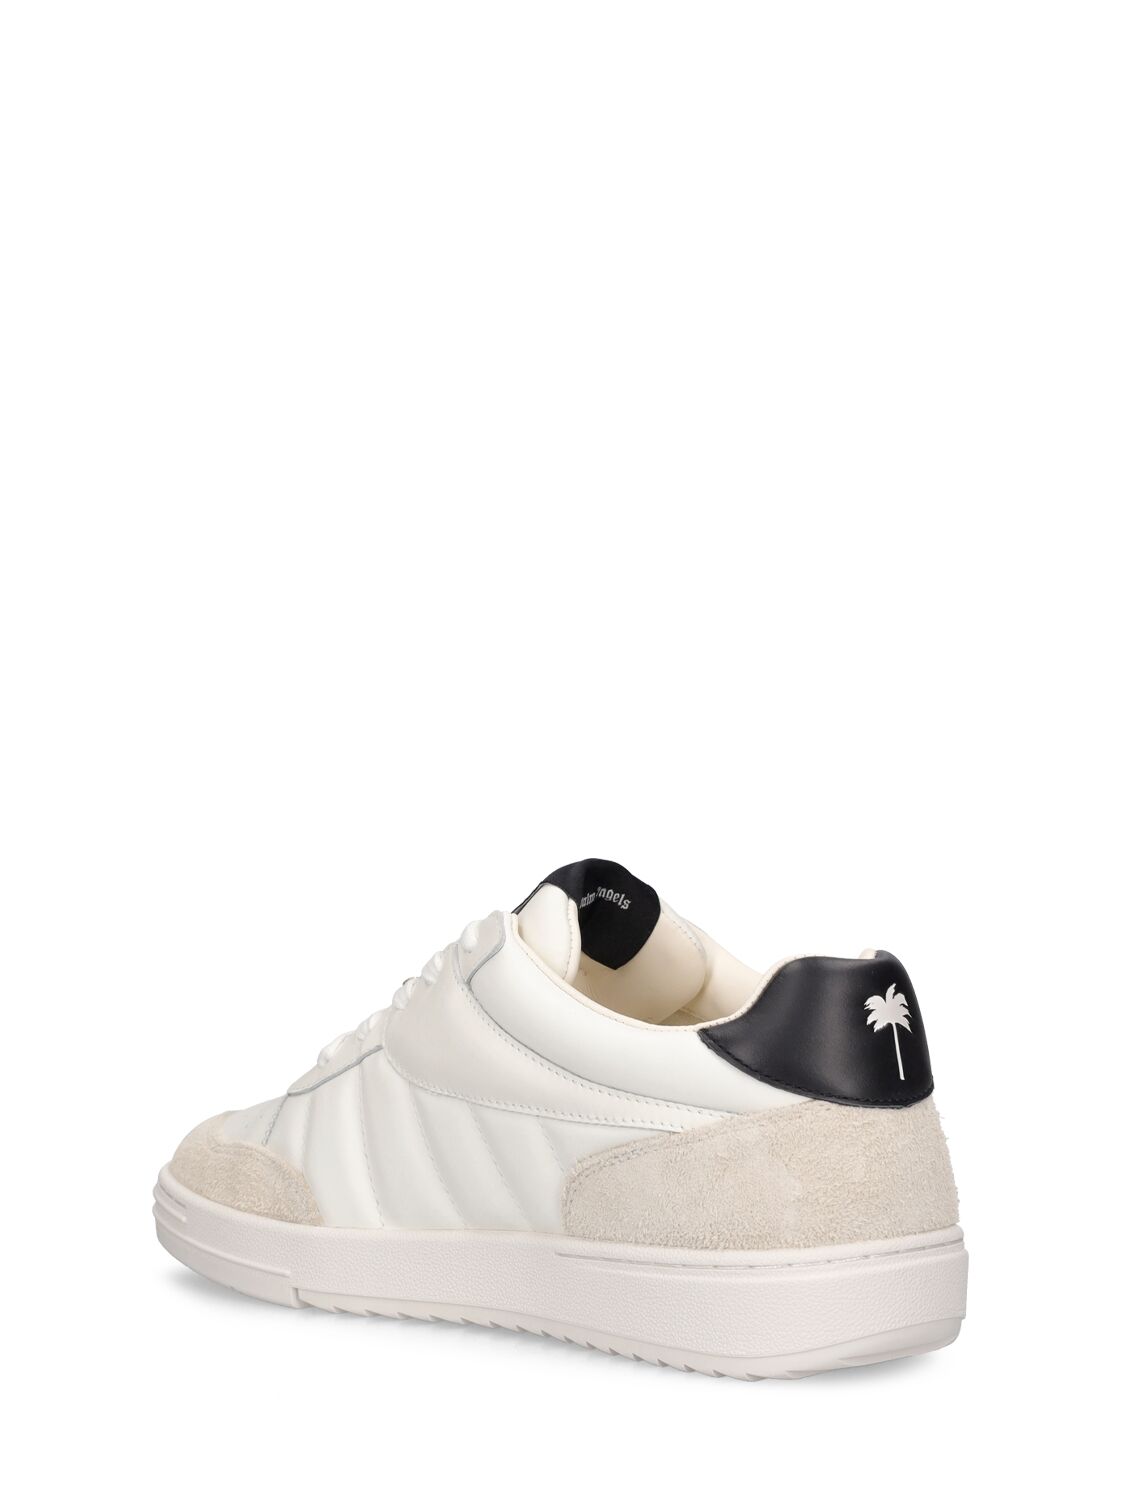 Shop Palm Angels Palm Beach Leather Sneakers In White,black